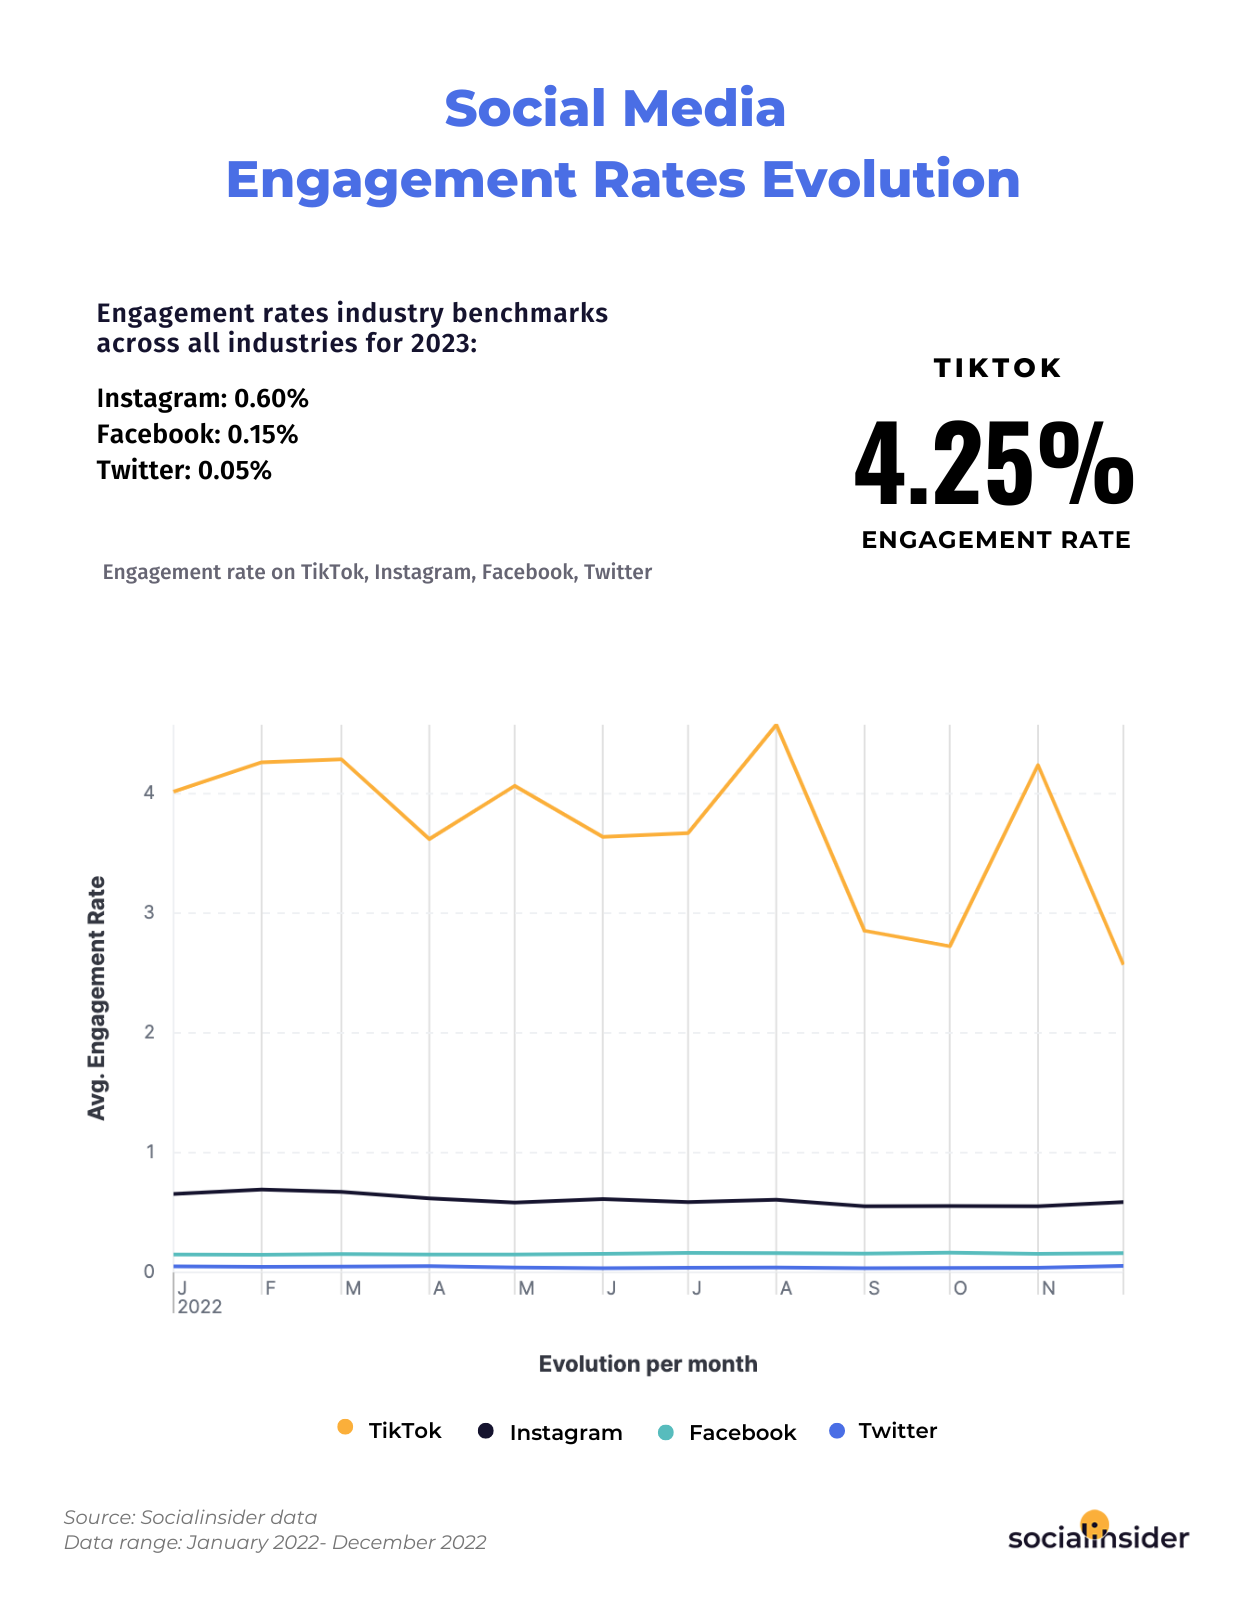 This chart indicates the evolution of the social media engagement and shows engagement benchmarks for 2023.